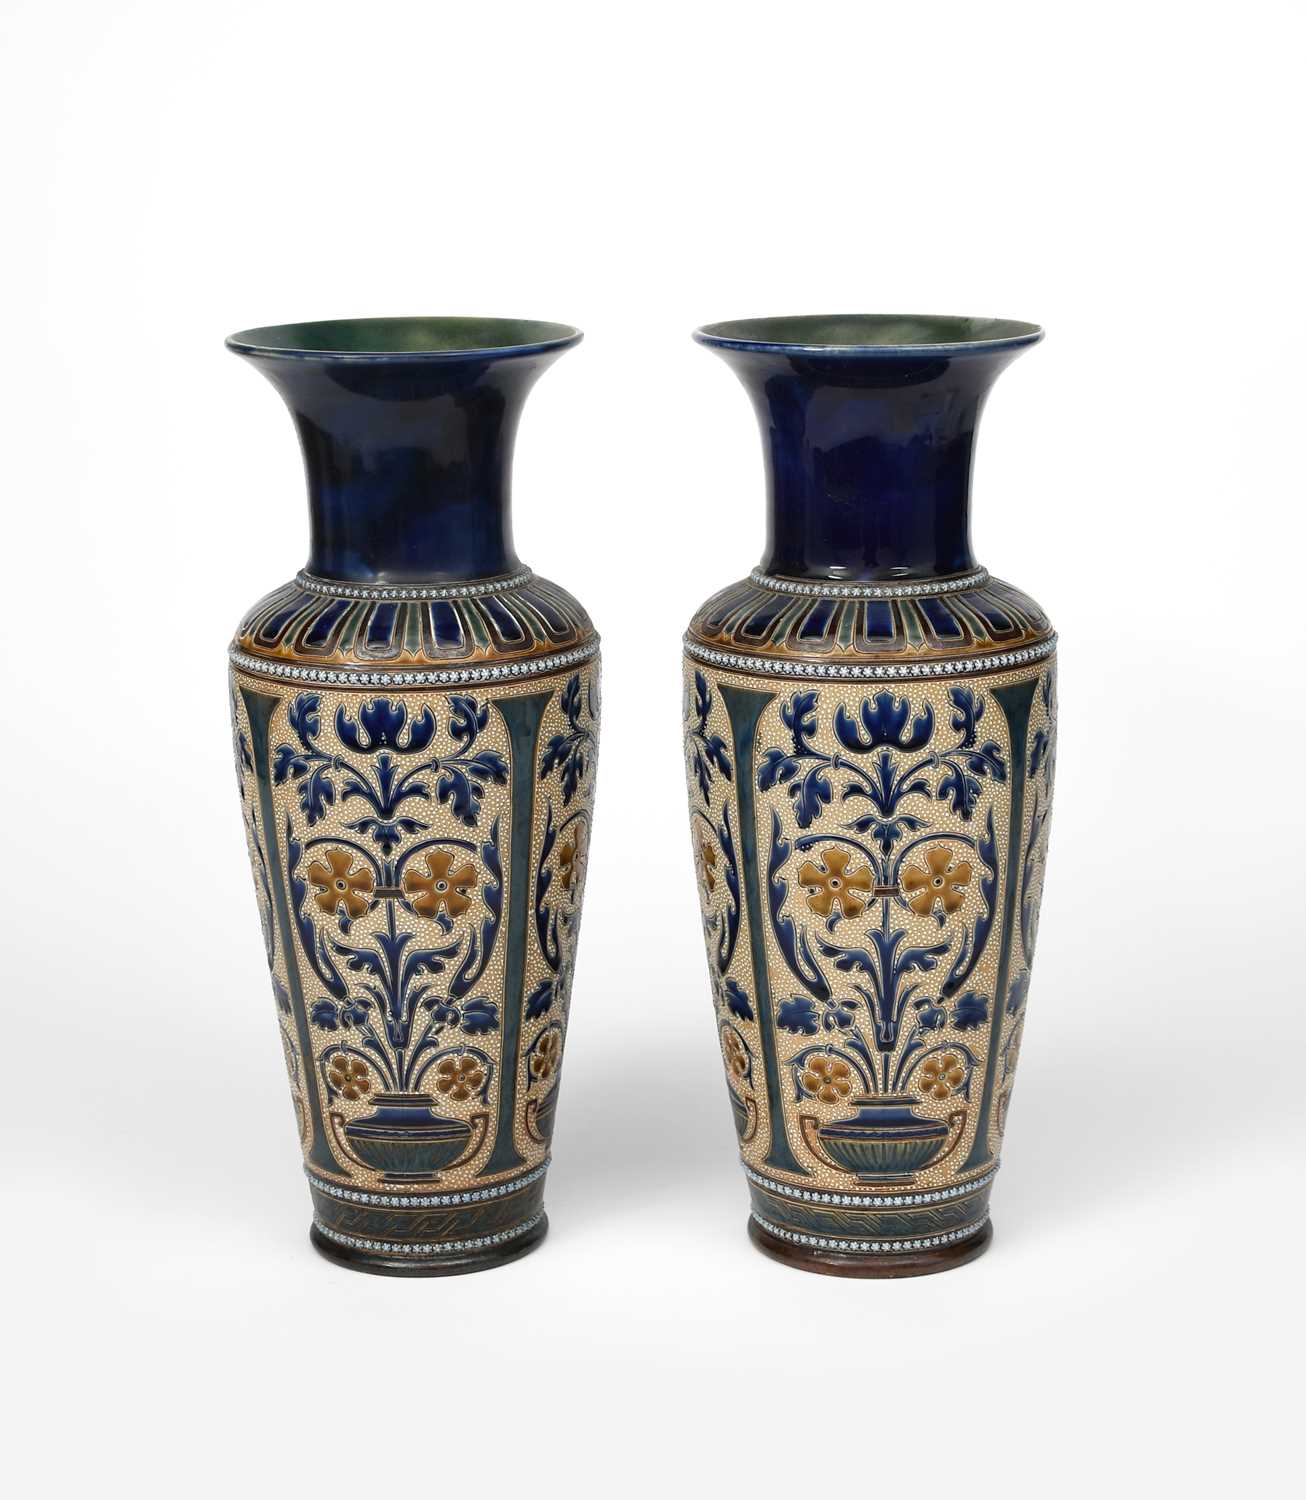 A pair of Doulton Lambeth stoneware vases by George Hugo Tabor, dated 1883, shouldered form, incised